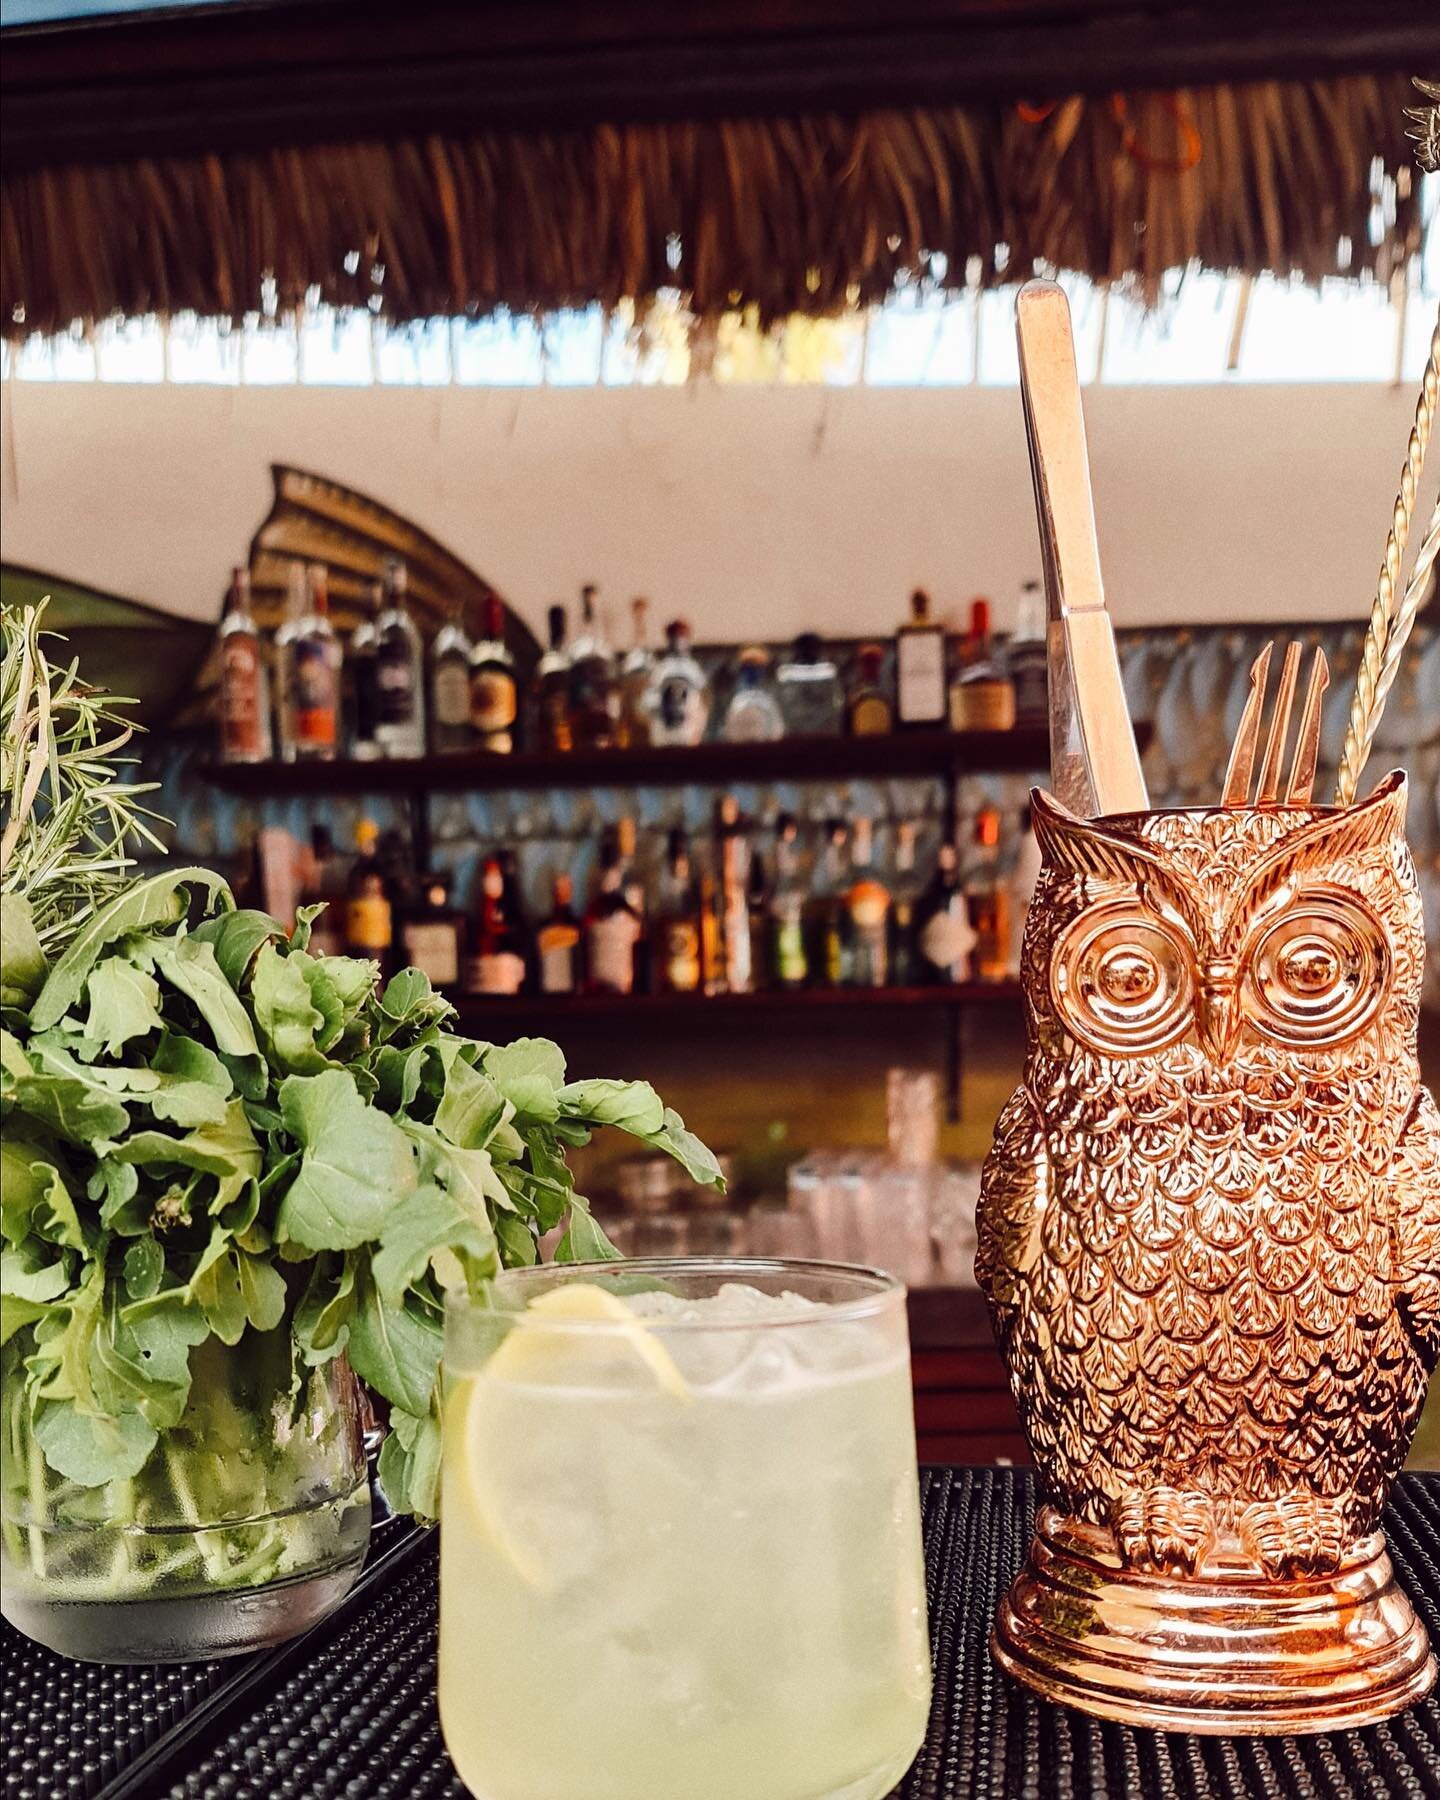 Escape the ordinary and treat yourself to something special at @barracudacantina_todossantos . 🍸

Unique cocktails and a relaxed atmosphere right in downtown Todos Santos at Plaza Amigos. 

#Barracuda #TodosSantos #todossantosbcs #todossantosmexico 